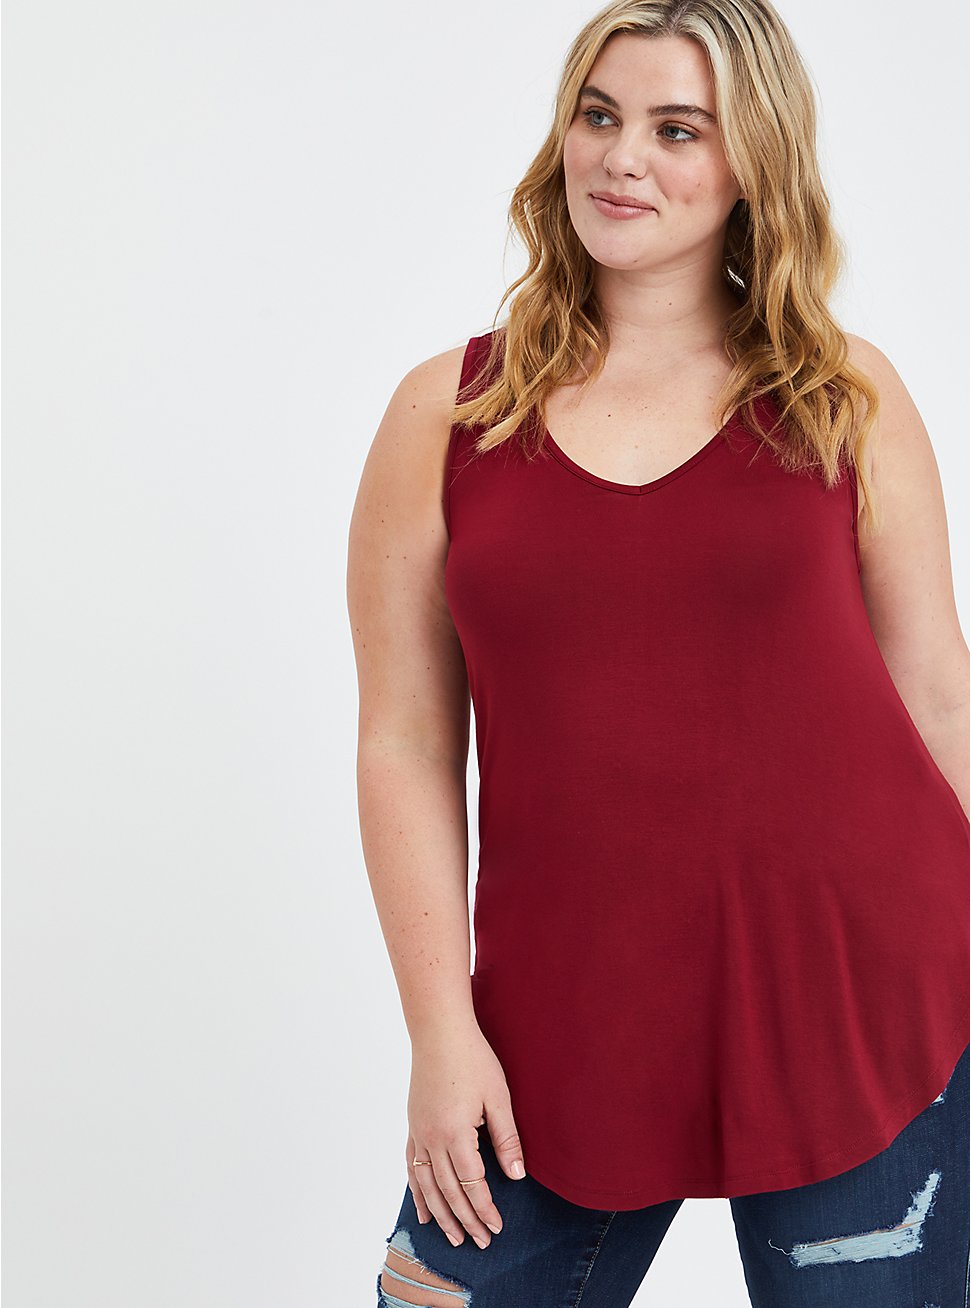 Plus Size Favorite Tunic Tank - Super Soft Red, RED, hi-res